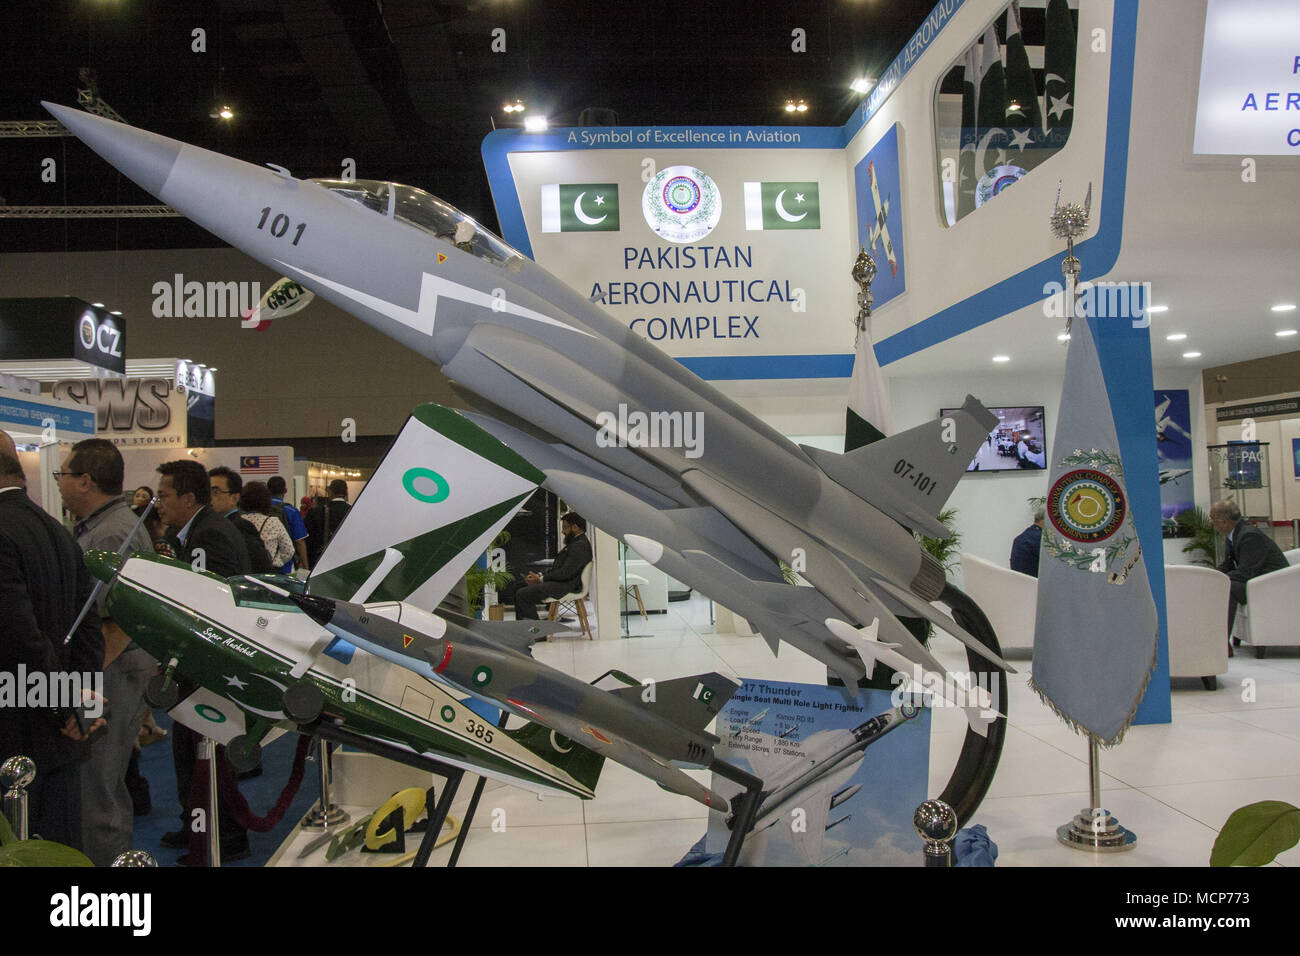 Kuala Lumpur, Malaysia. 17th Apr, 2018. Pakistan Aeronautical Complex booth seen at the DSA 2018.The 16th Defense Service Asia Exhibition and Conference also known as DSA 2018 was held in Kuala Lumpur, Malaysia on 16th-19th April 2018. It's one of the top 5 defense shows in the world. Admission is open to government defense & security personnel, defense & security industry professionals & executives and other specially invited guests only. 1,500 companies from 60 nations and more than 50,000 trade visitors from around the world participated in the exhibition. Defense Service Asia has s Stock Photo